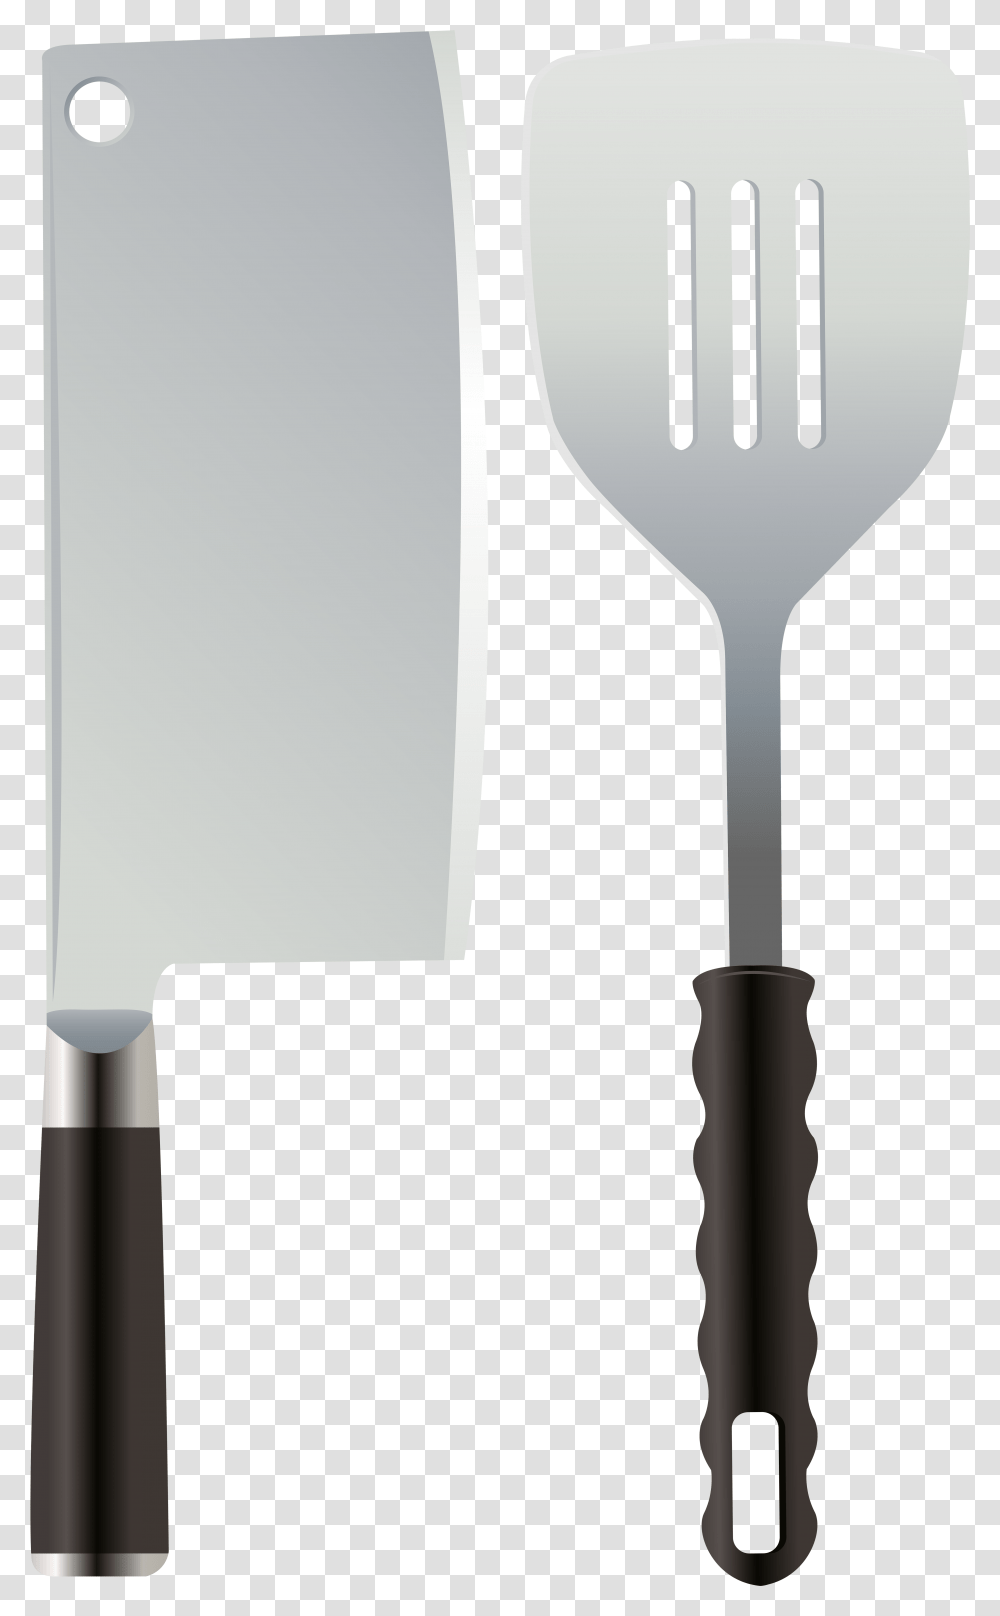 Kitchen Knife And Spatula Clip Art, Fork, Cutlery Transparent Png